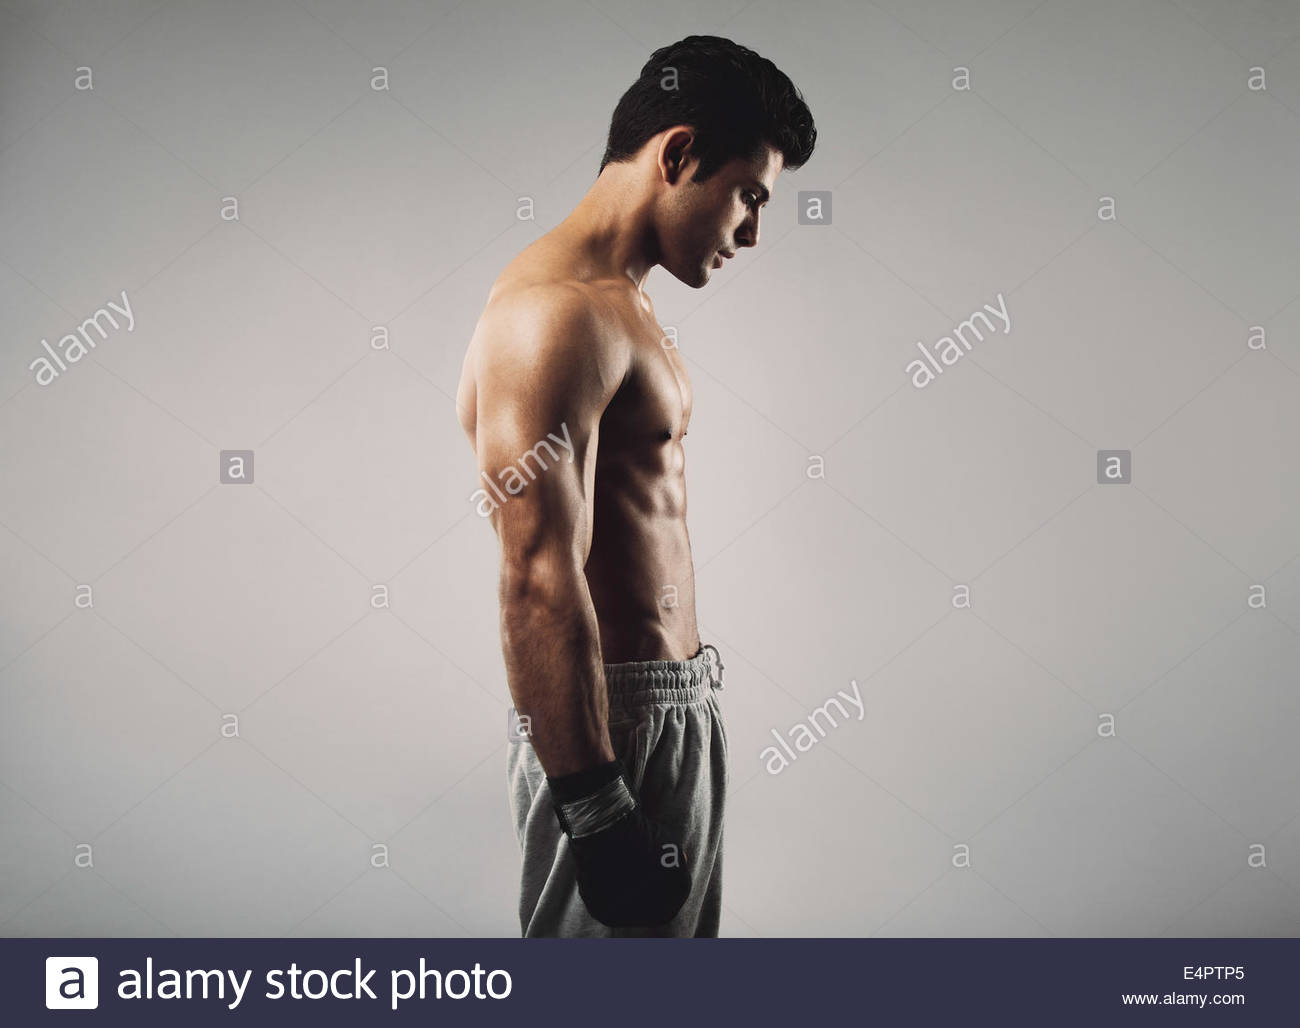 Side Of Fit Young Man Wearing Boxing Gloves Looking Down On